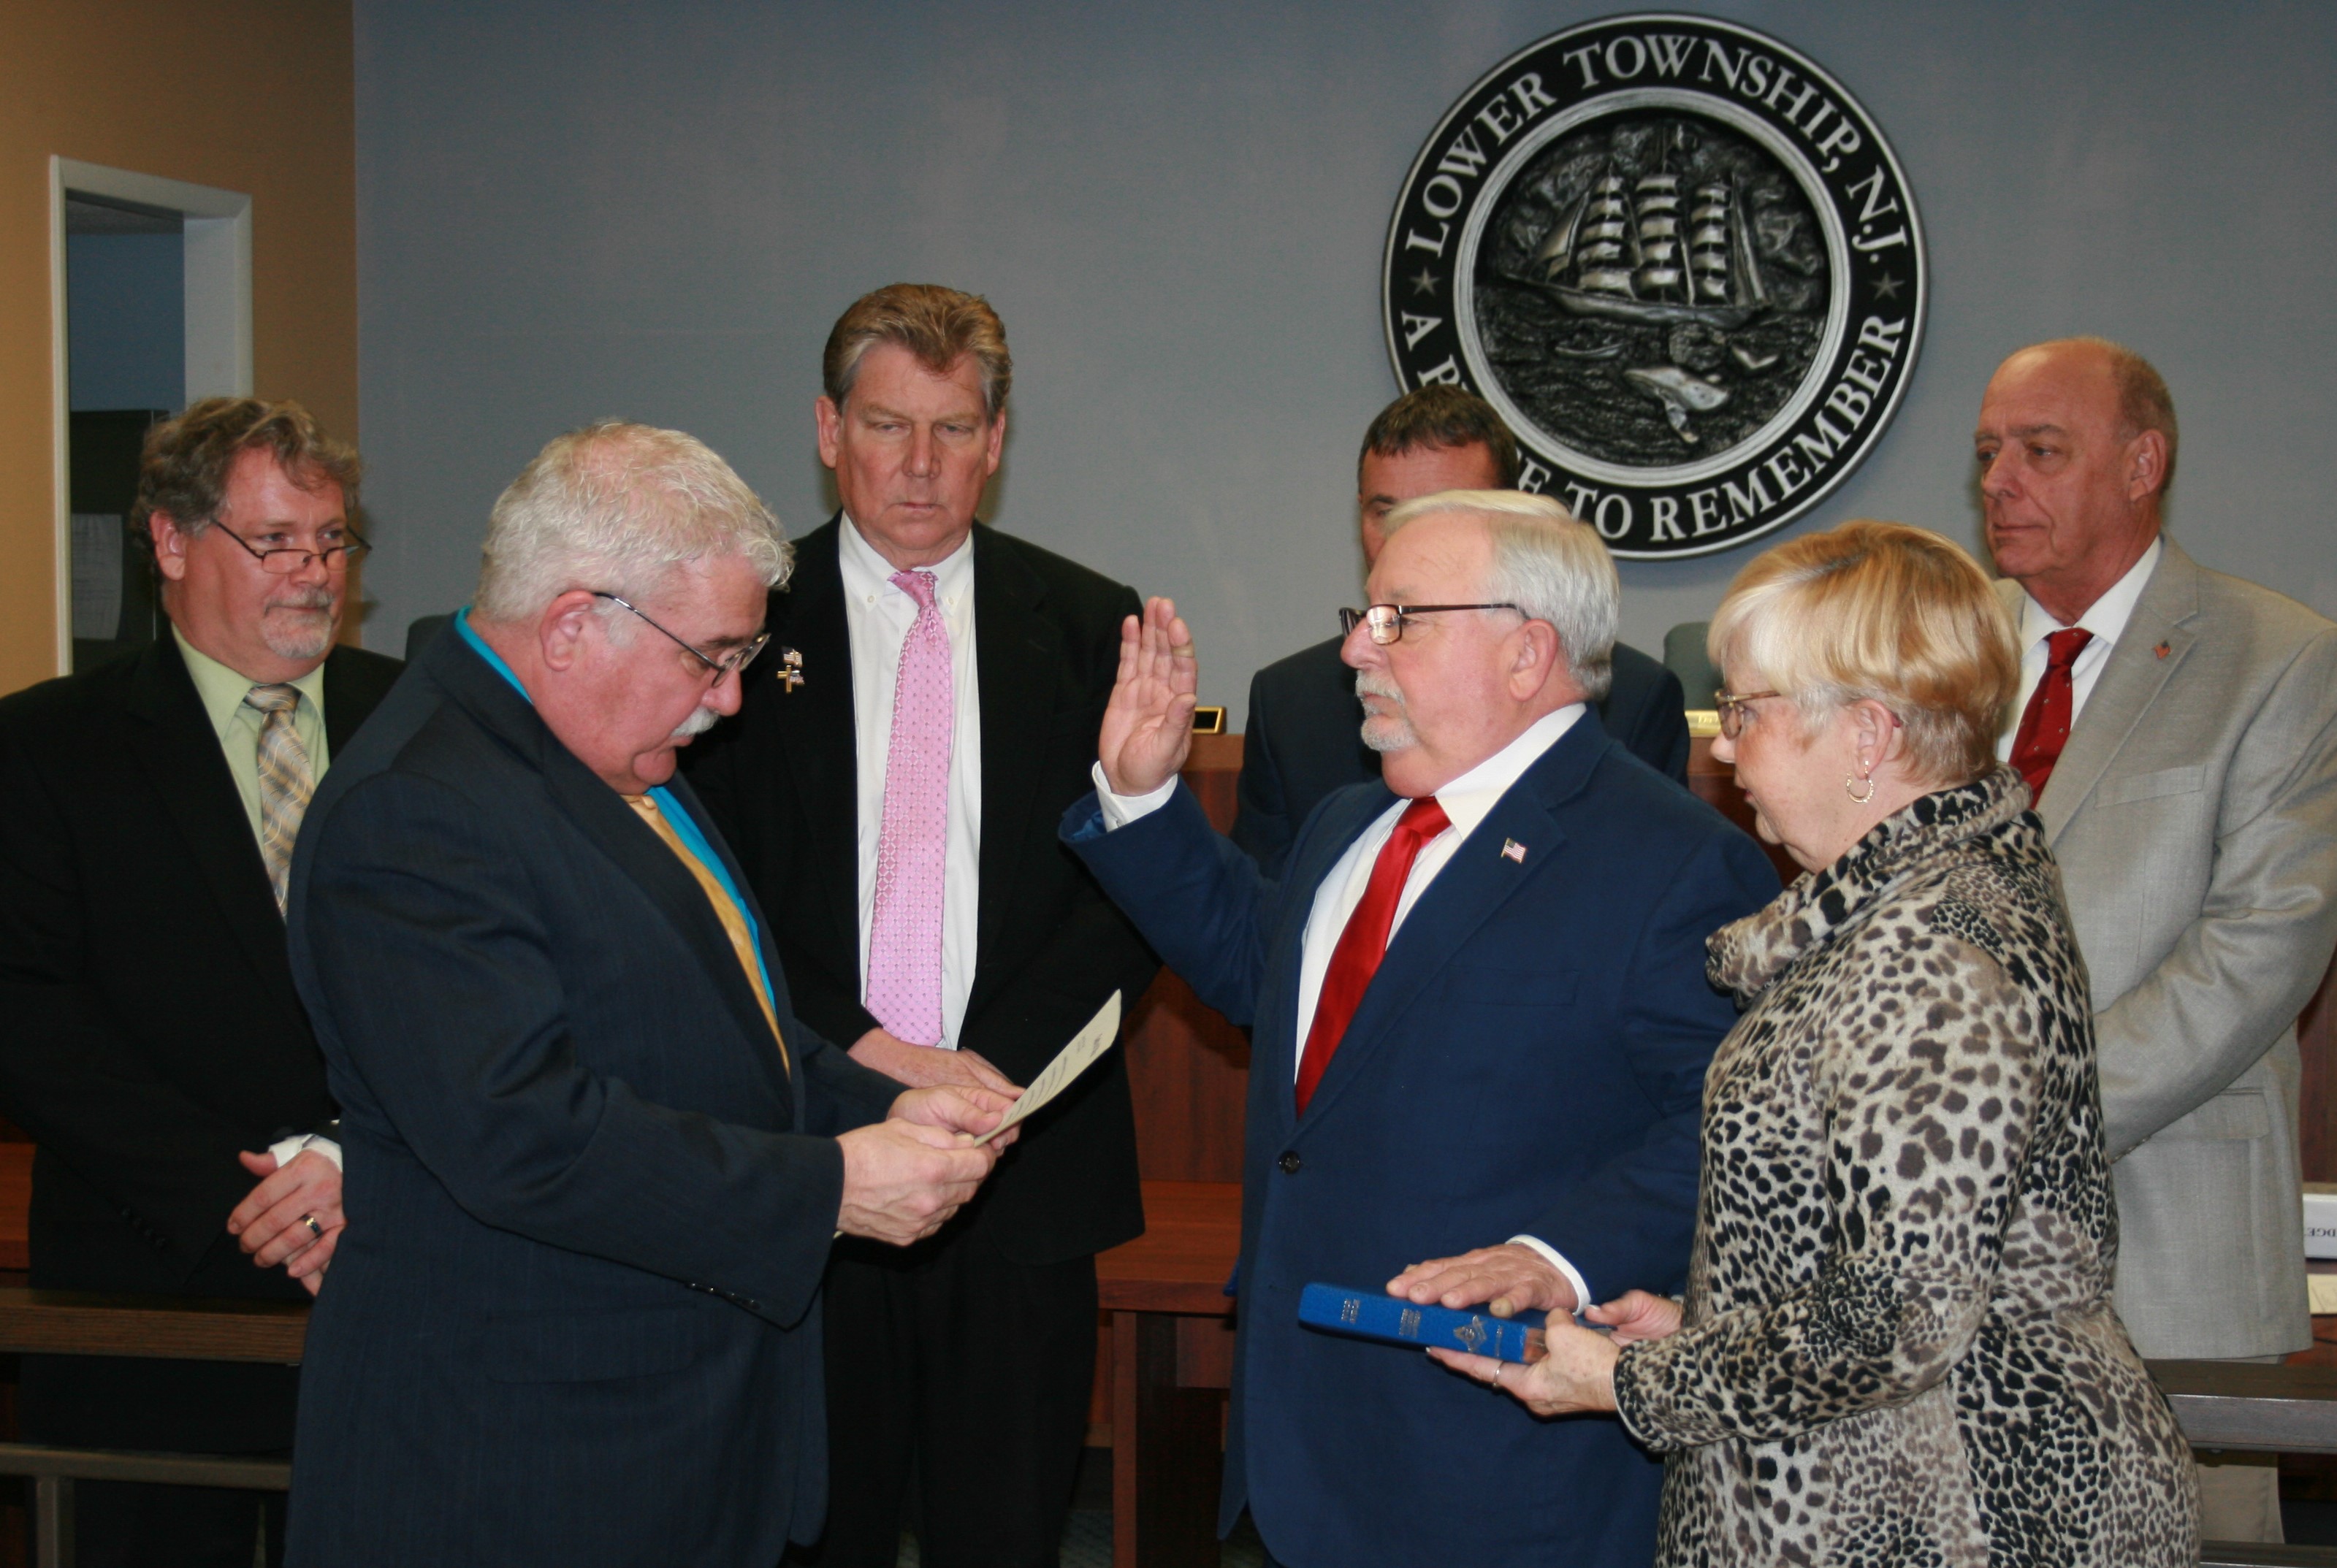 Deputy Mayor David Perry takes his oath of office from Cape May County Sheriff Robert Nolan